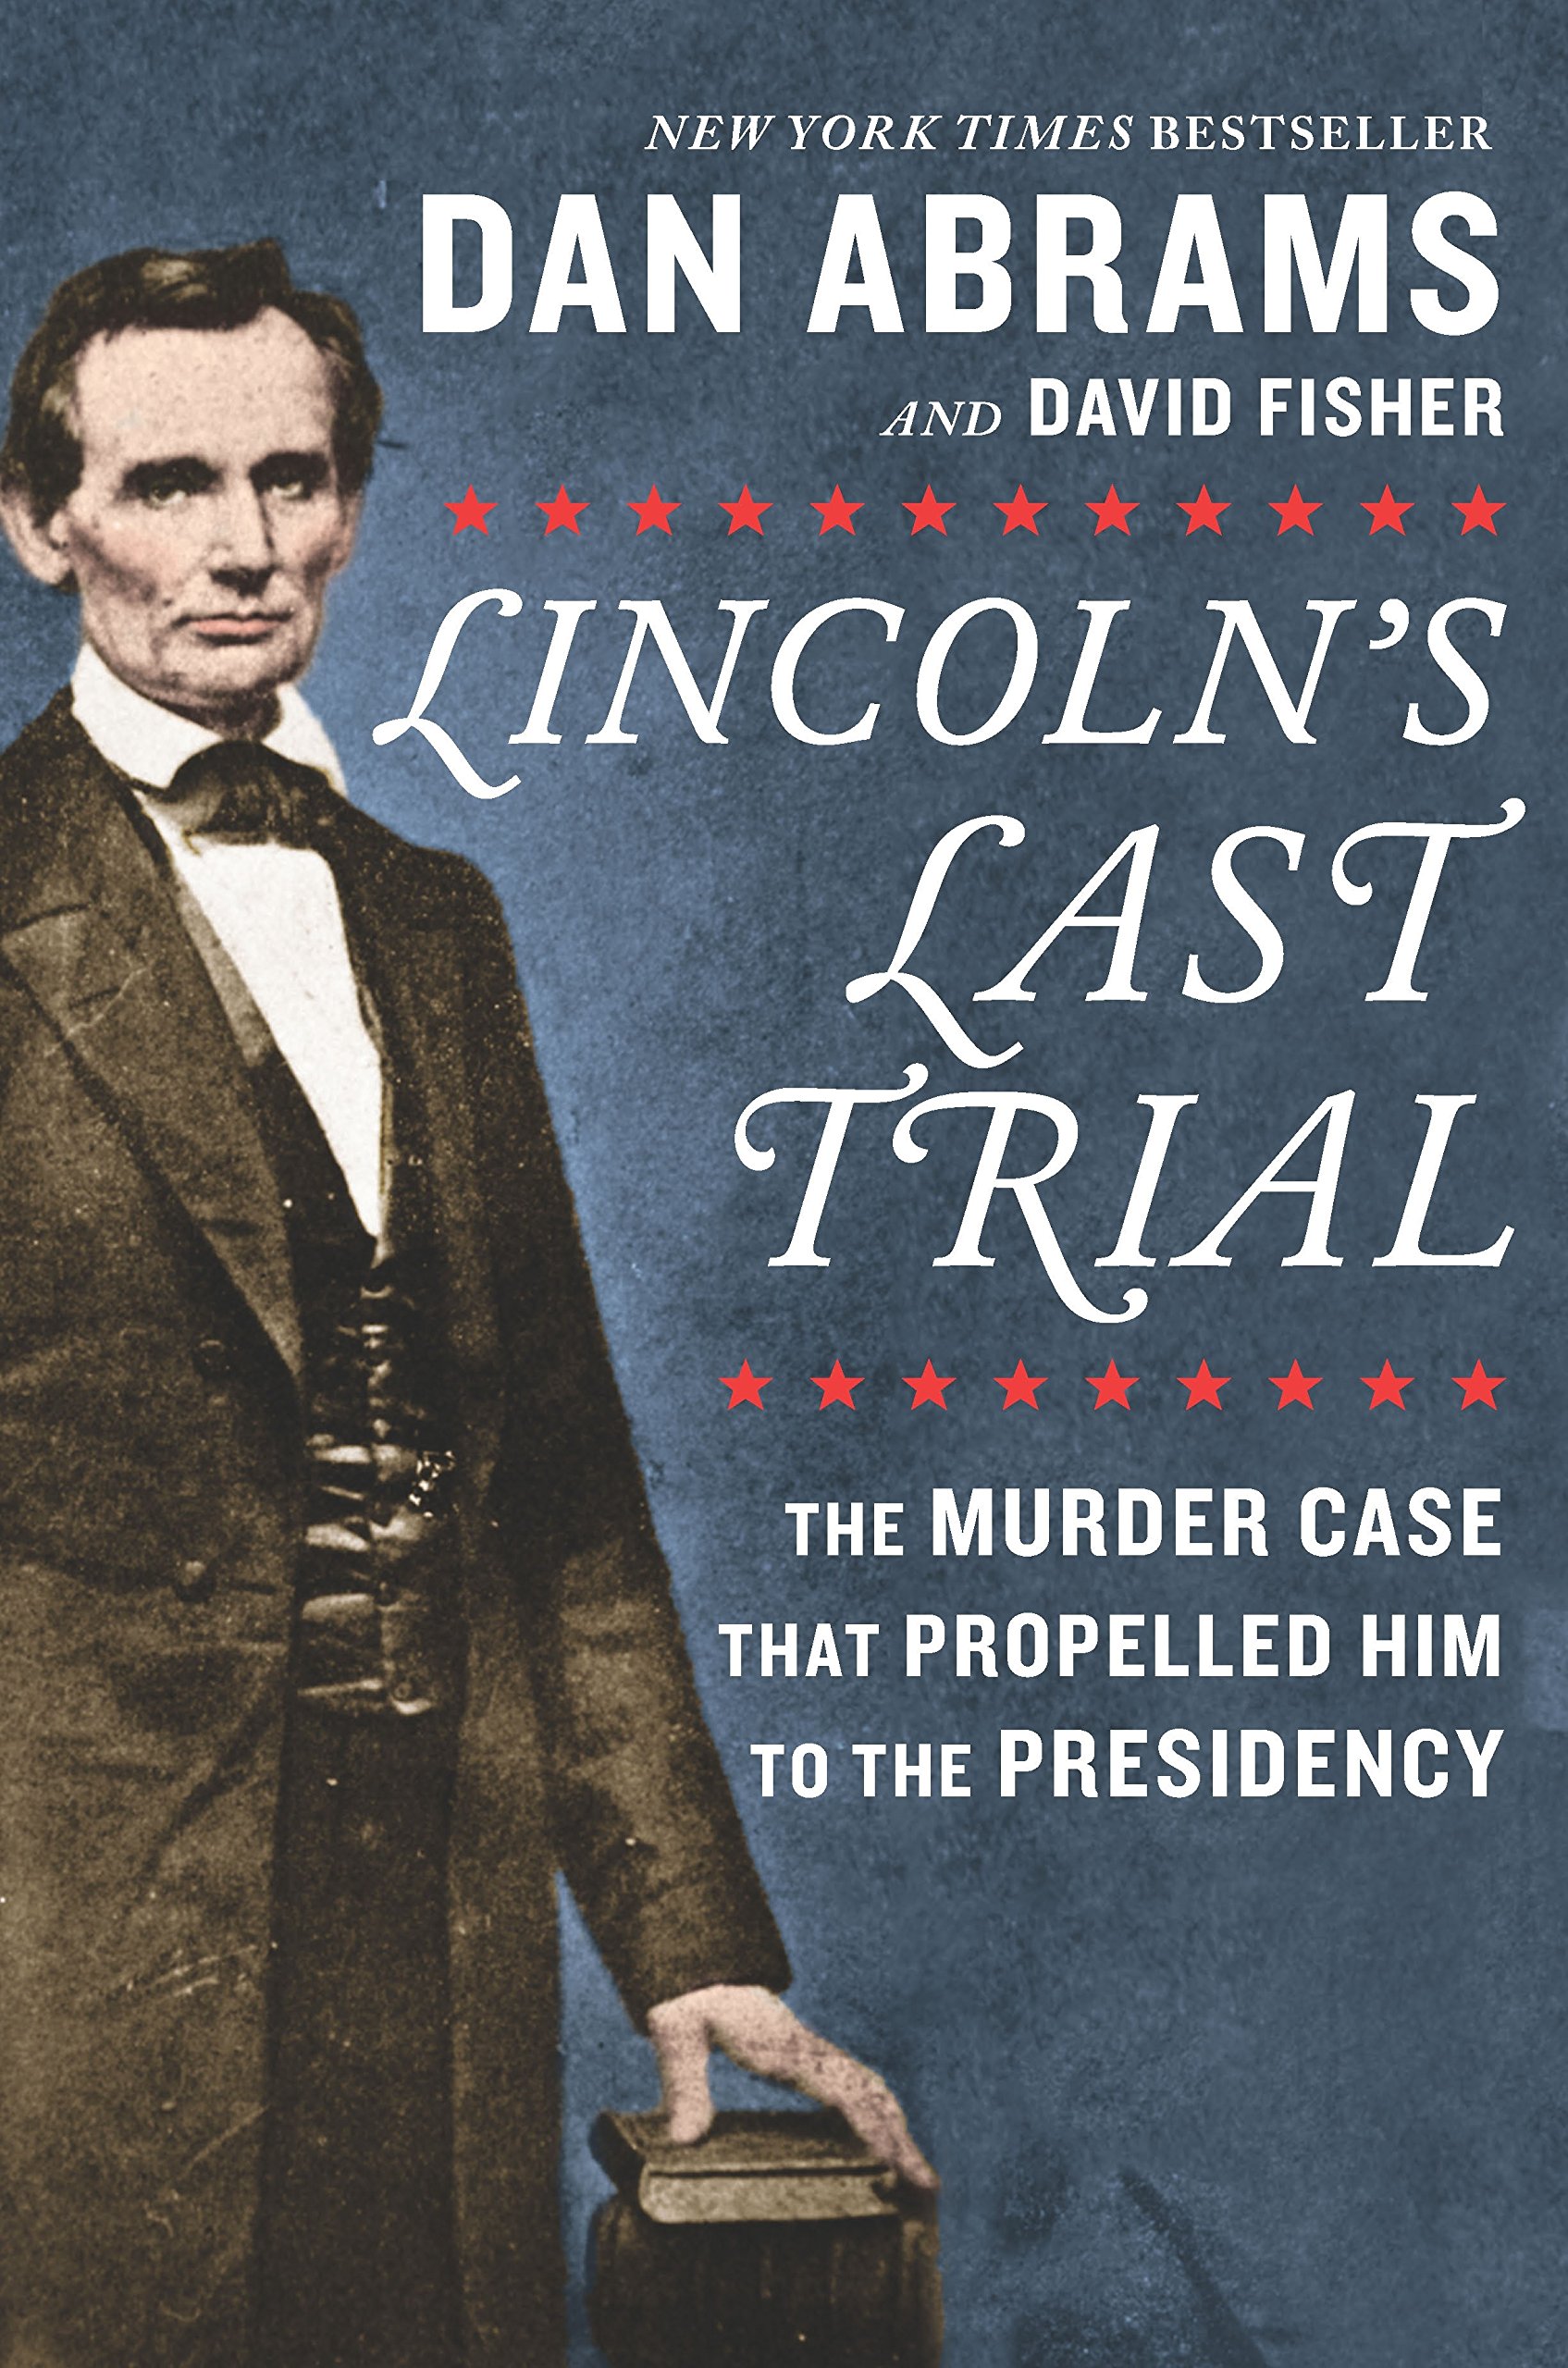 Image for "Lincoln's Last Trial: The Murder Case That Propelled Him to the Presidency"